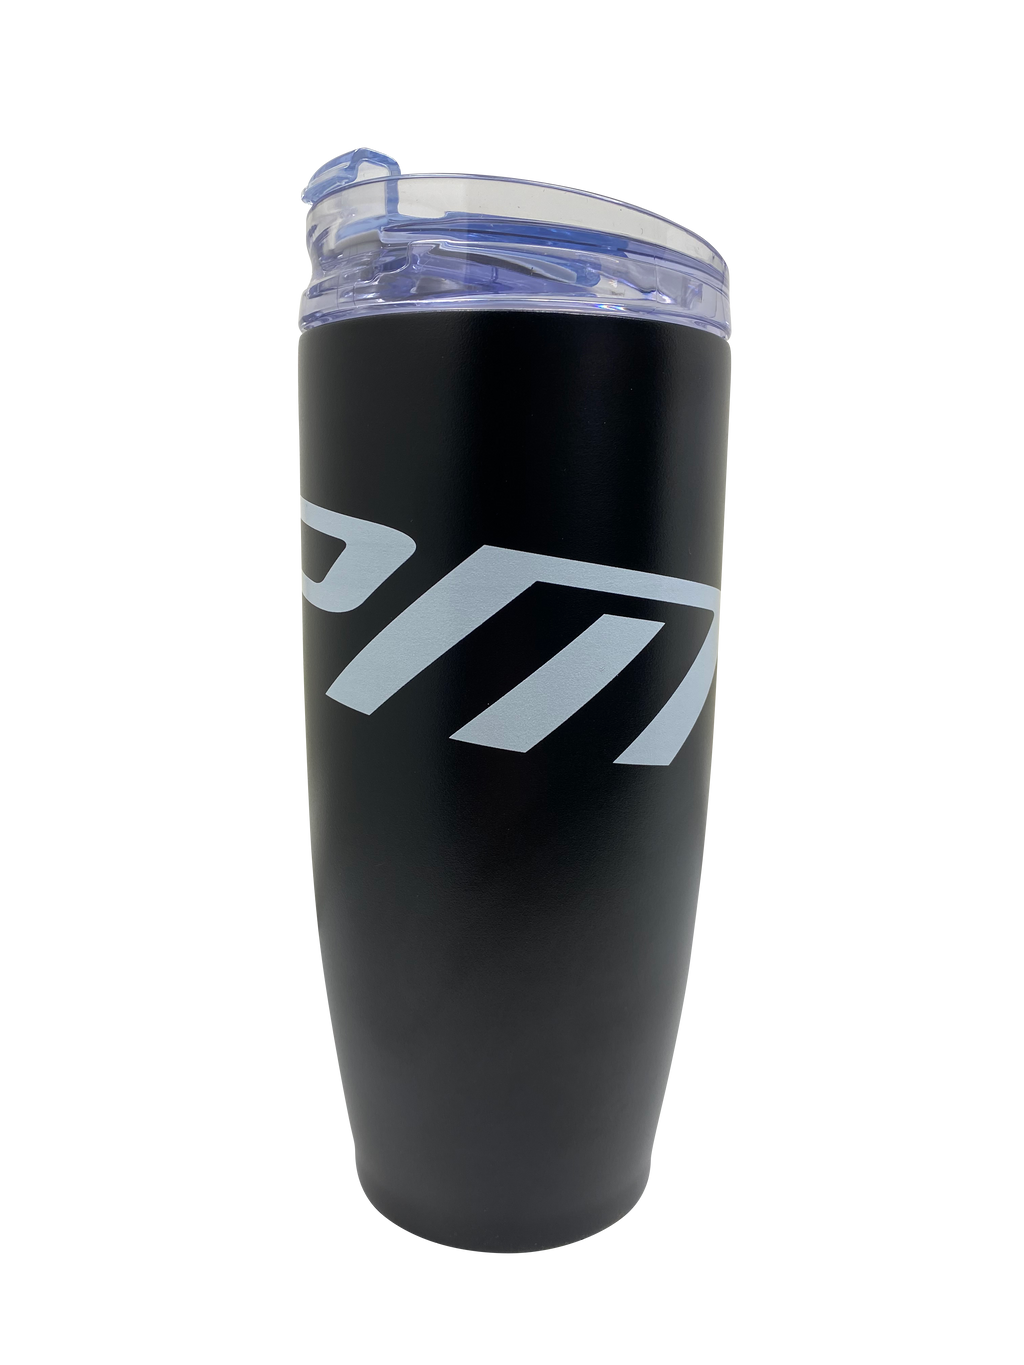 RPM Black and White Tumbler Cups!